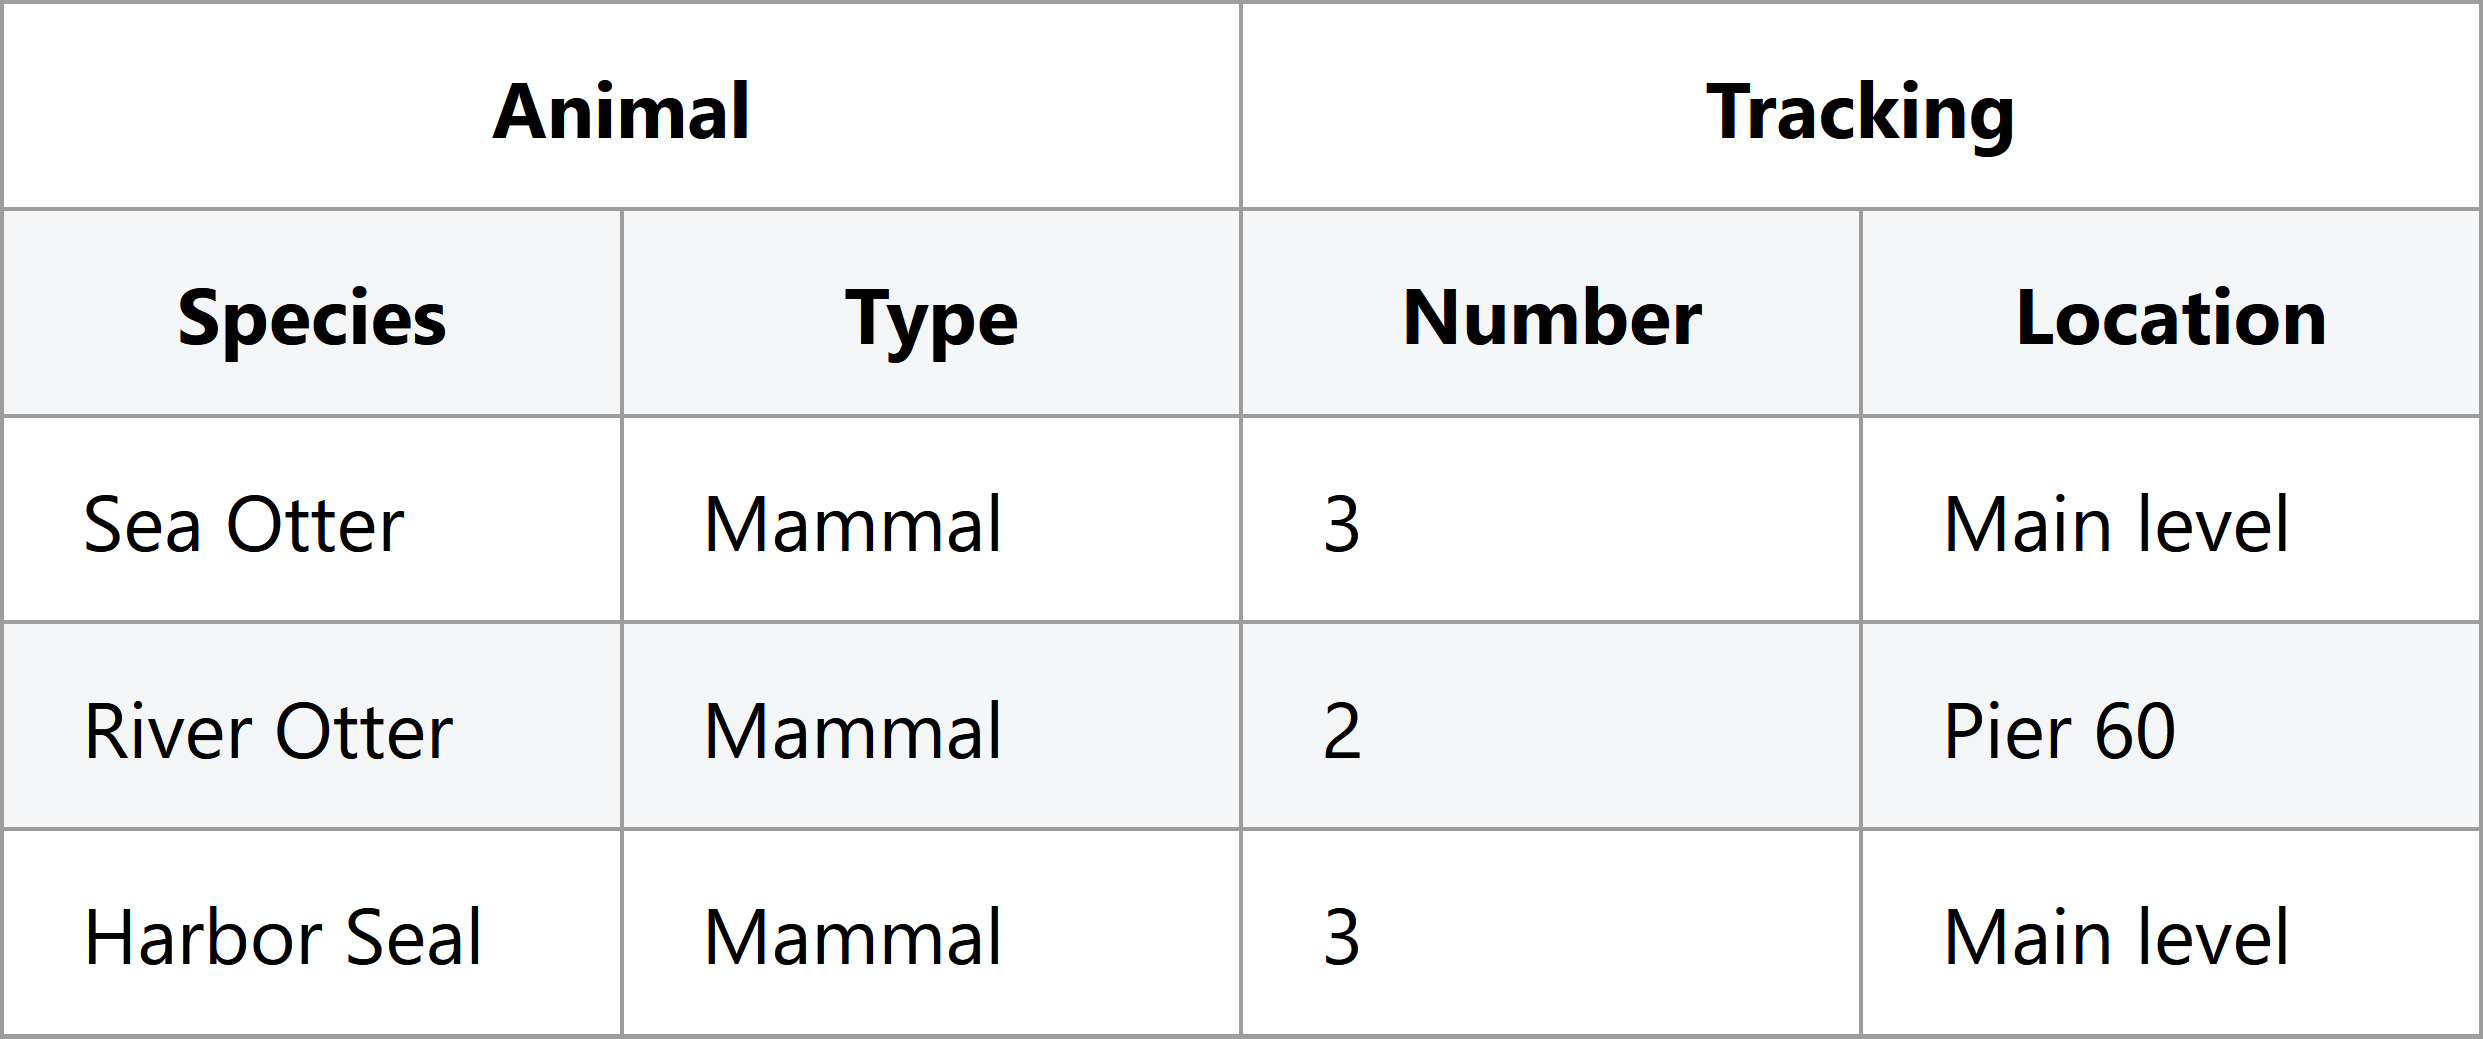 Screenshot of a 4-column table with the same animal data. It has top-level headers of "Animal" and "Tracking", and sub-headers of Species, Type, Number, and Location